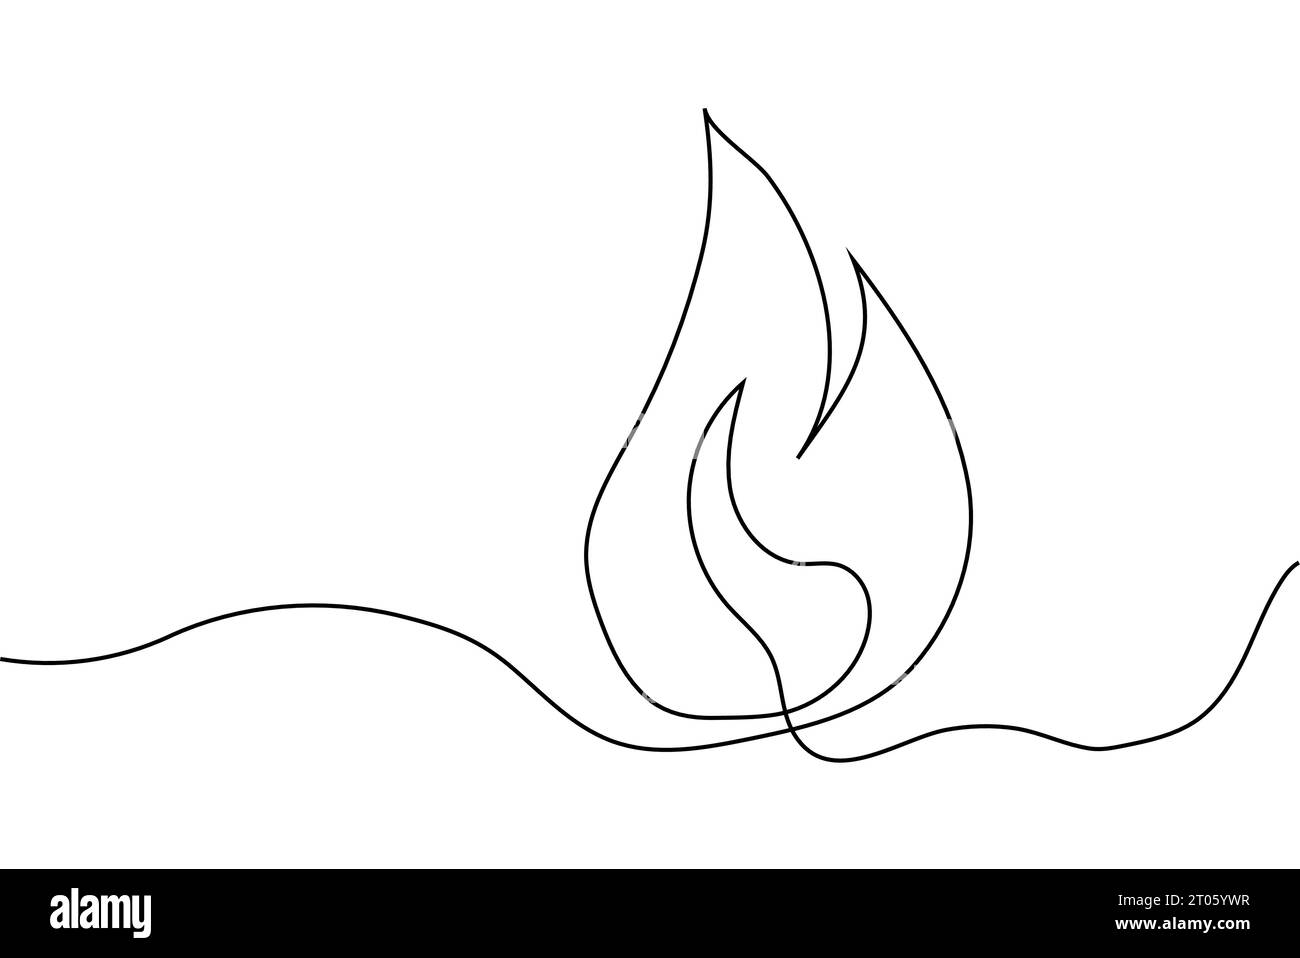 Fire in continuous line style. Flame line art vector illustration Stock Vector